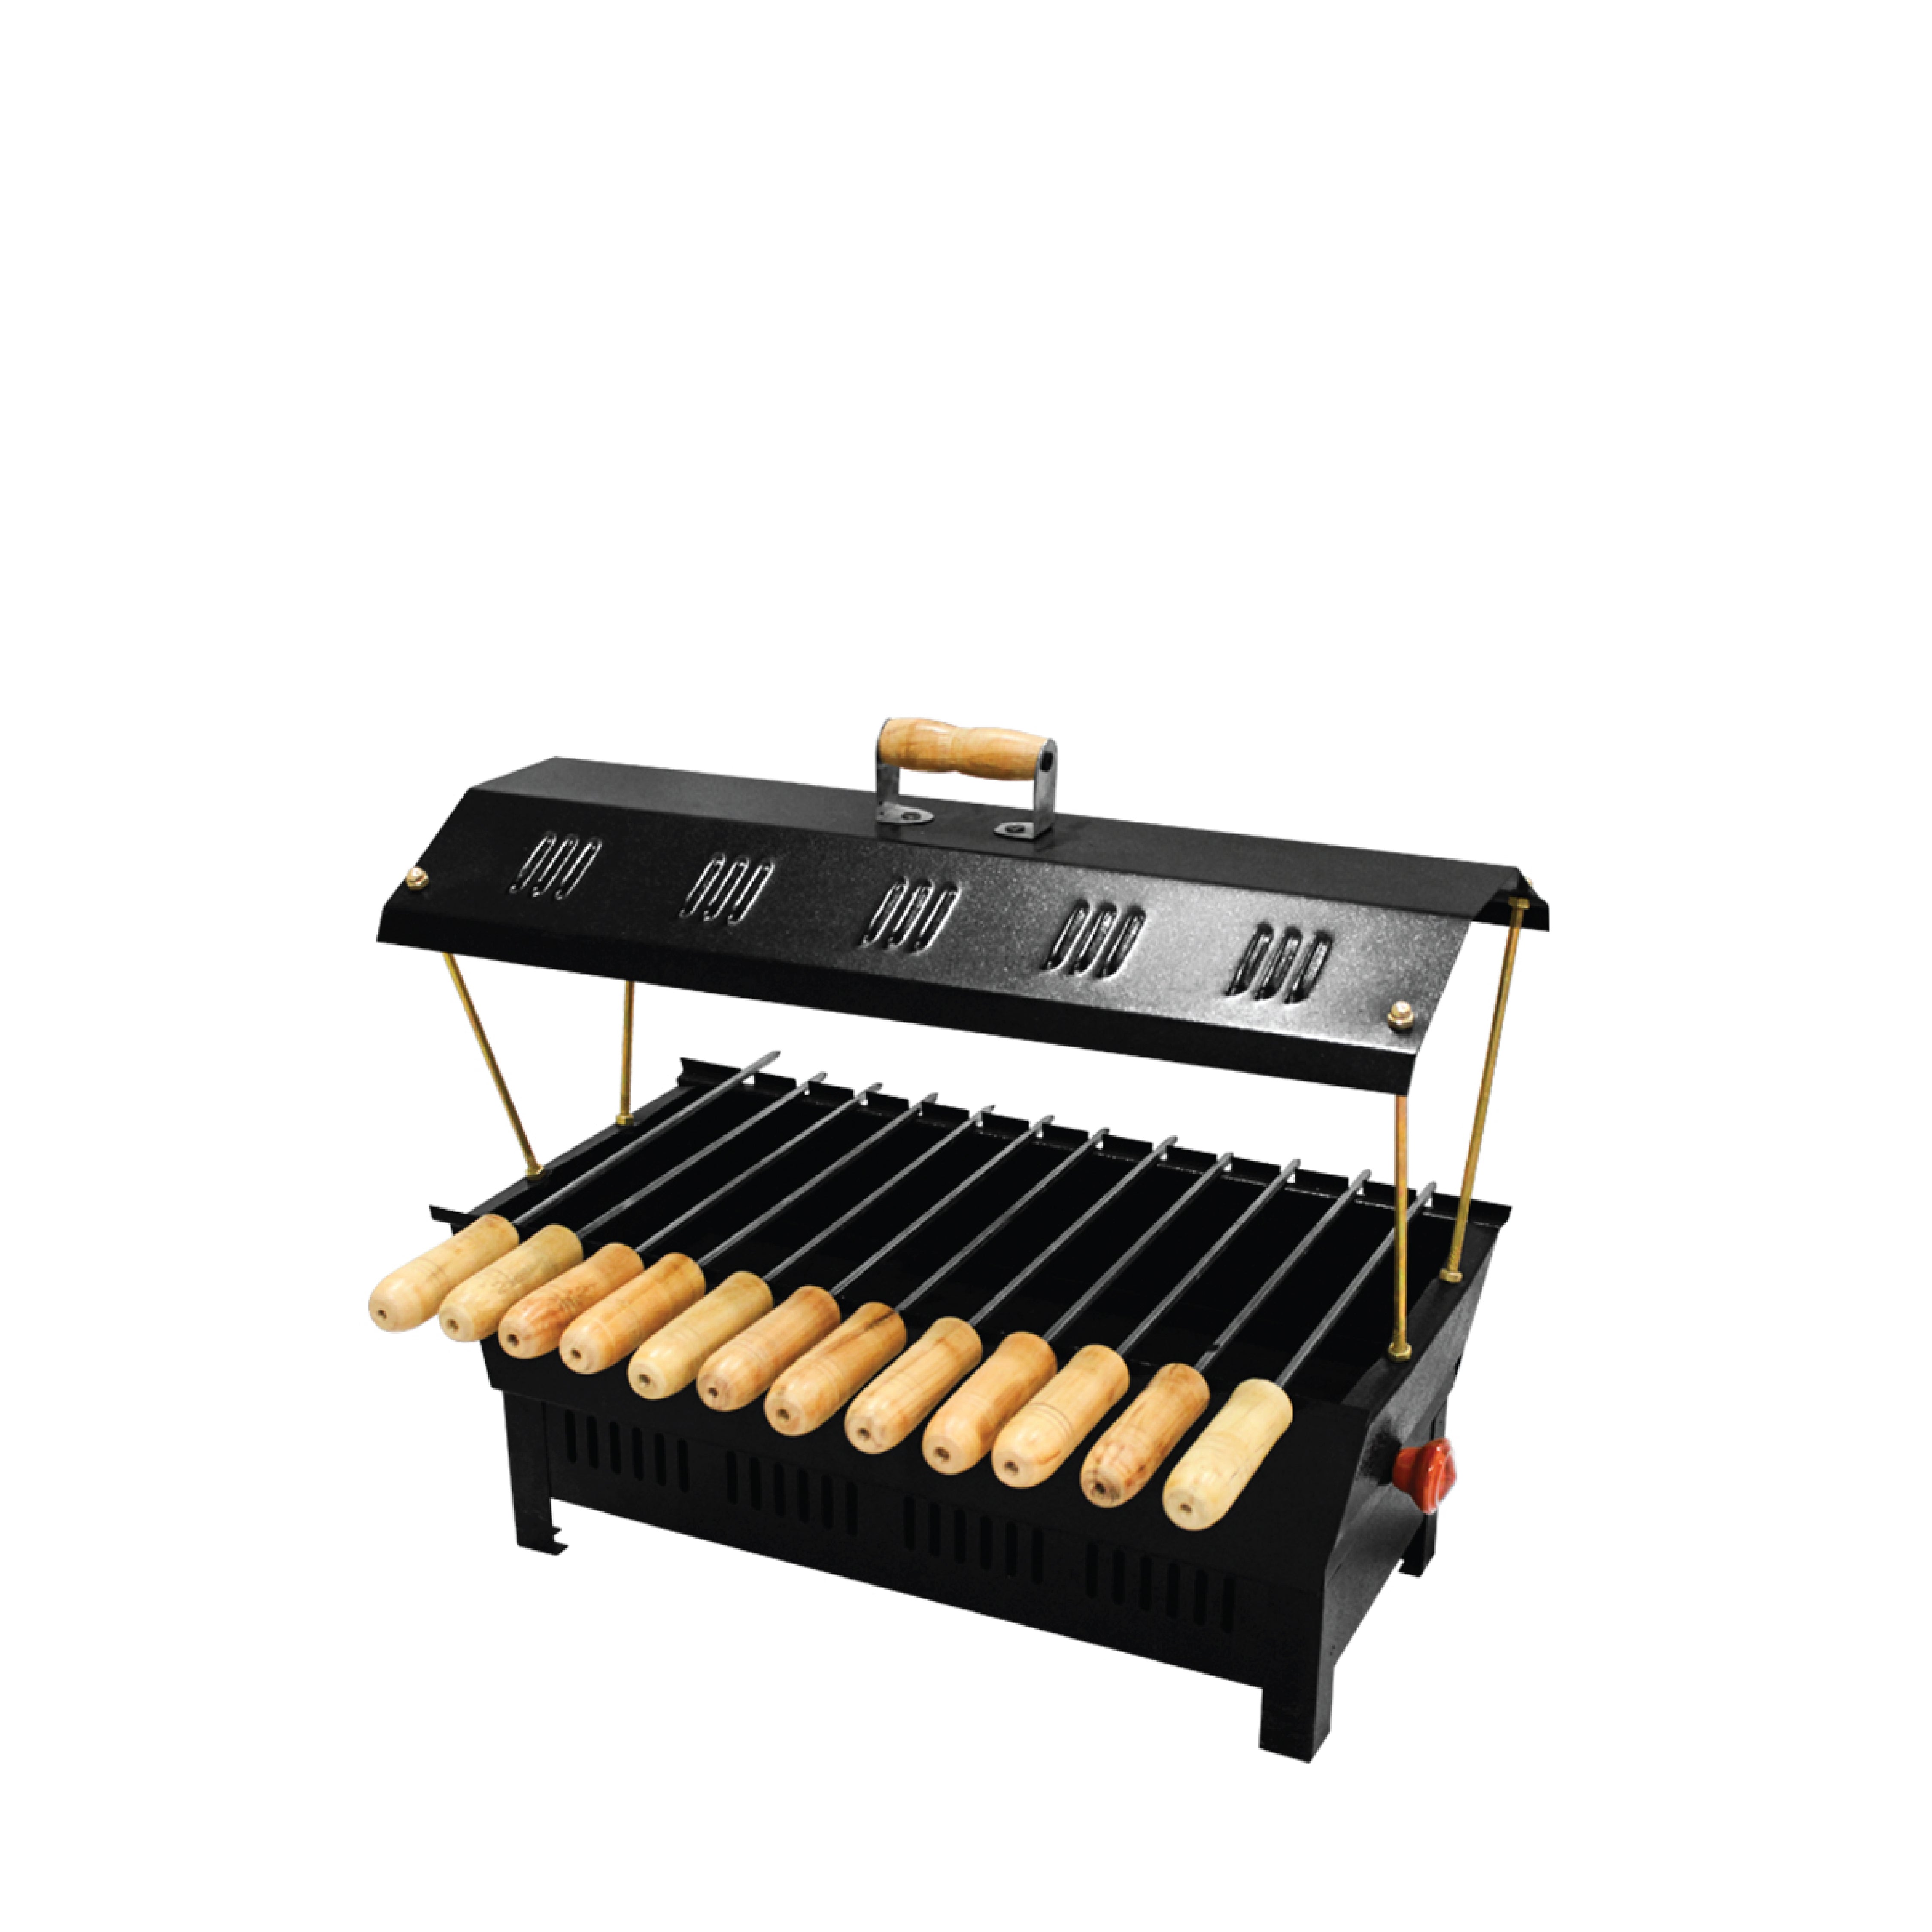 KOWS 12 skewer coal barbeque   (BBQ003)